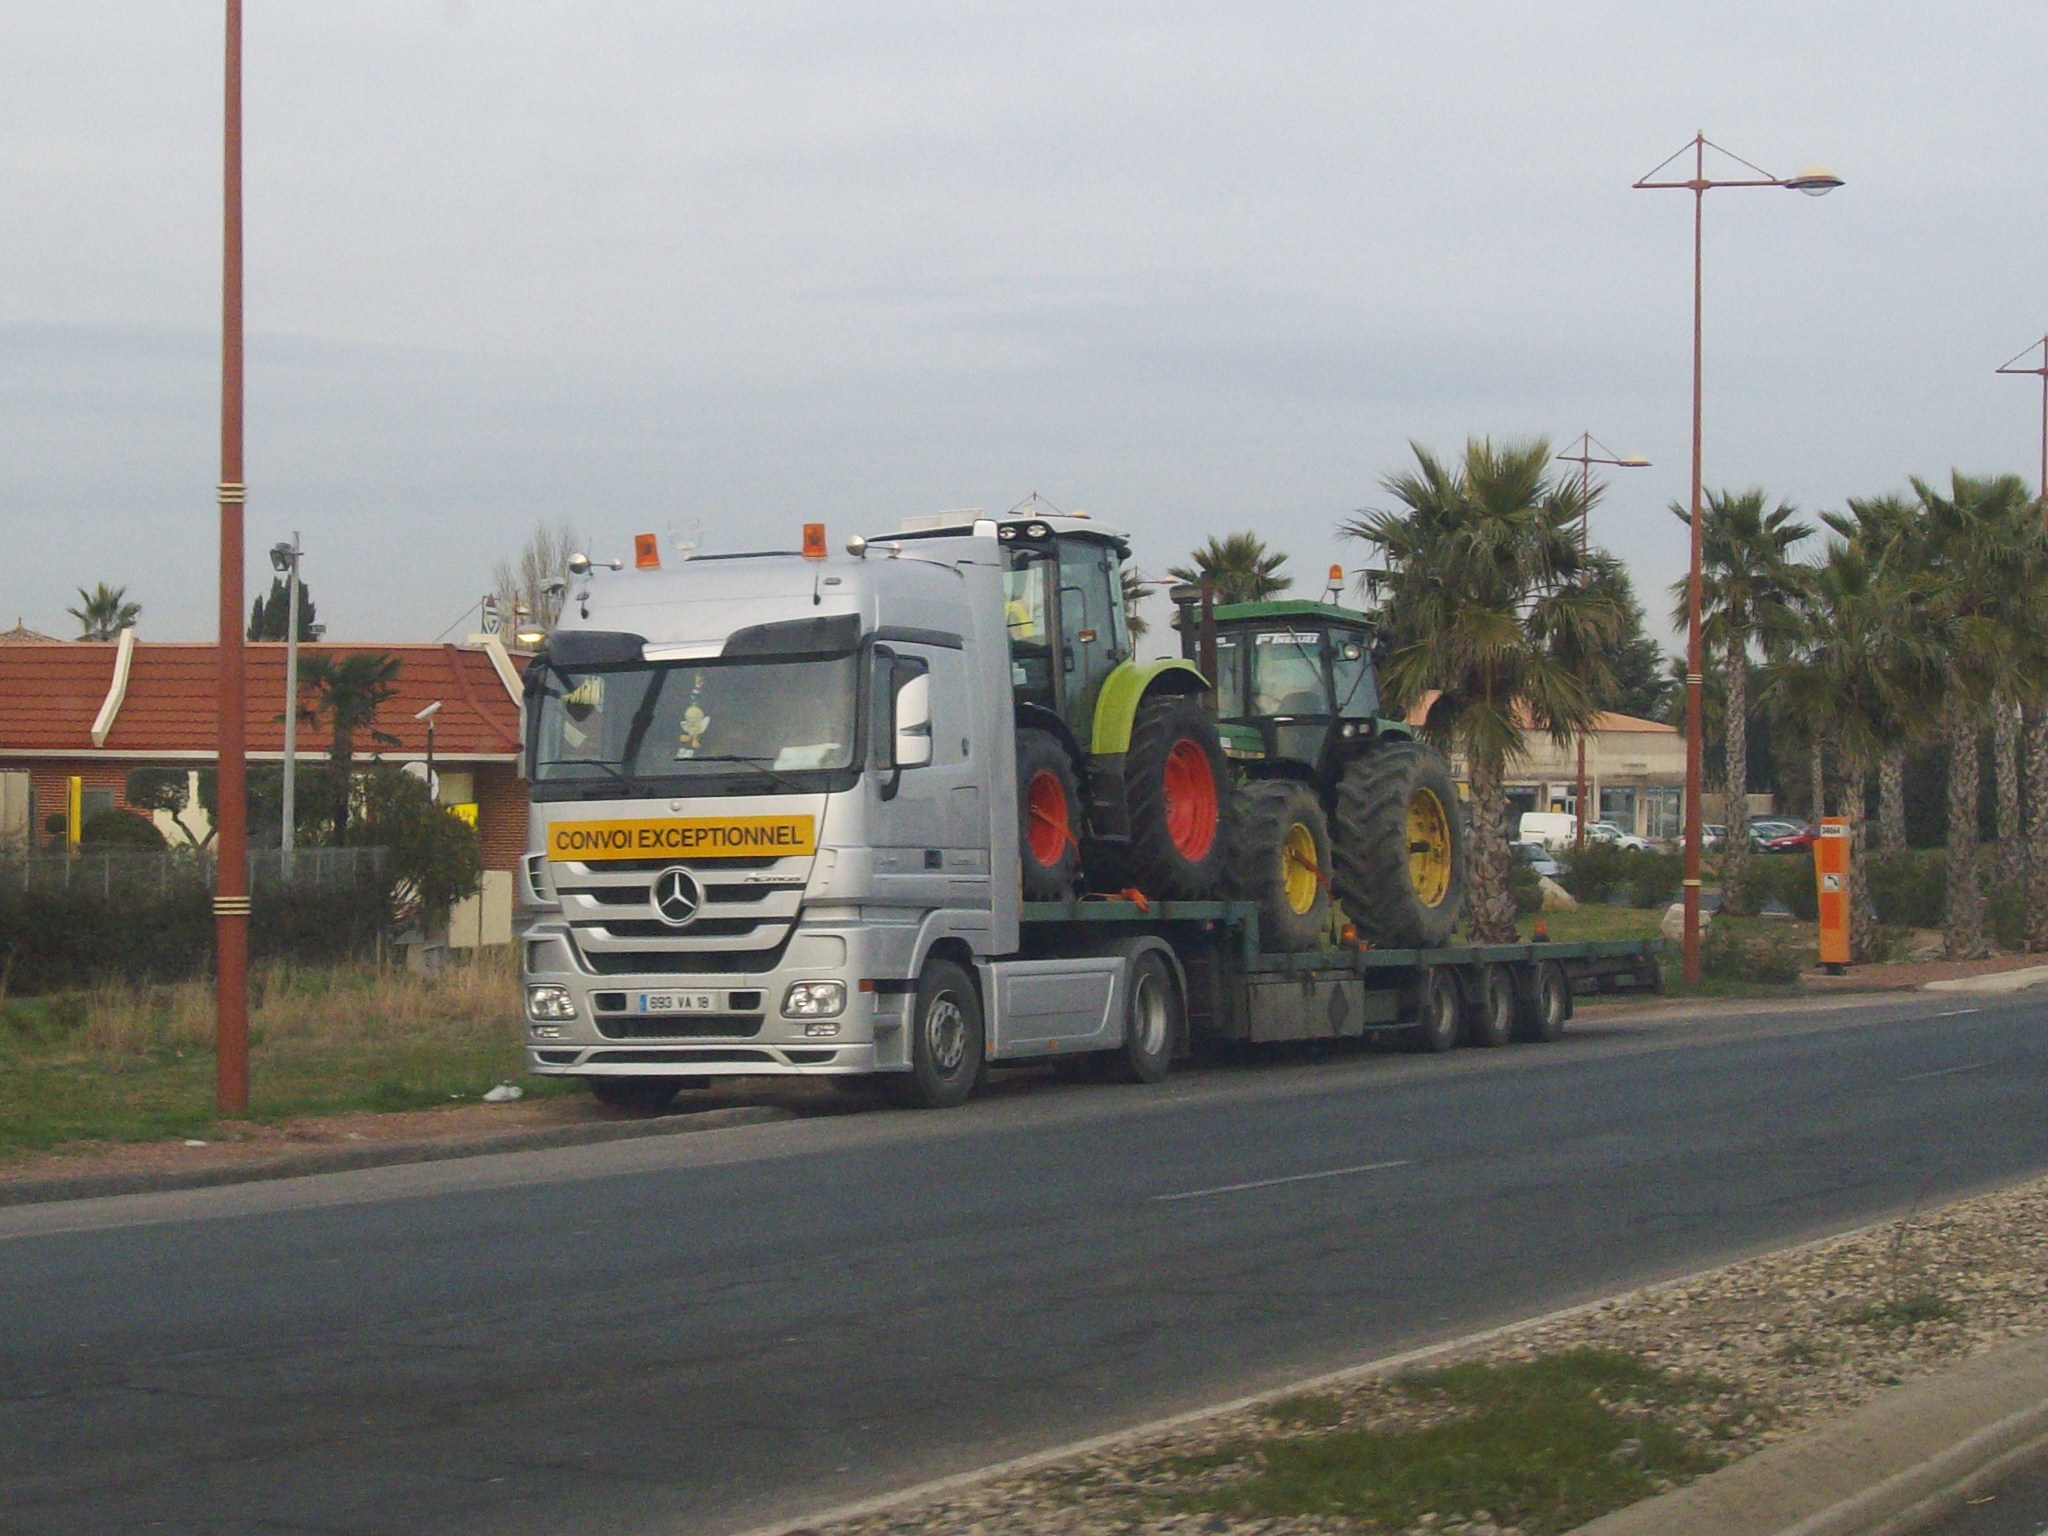 a tractor truck is parked on a street with a large trailer